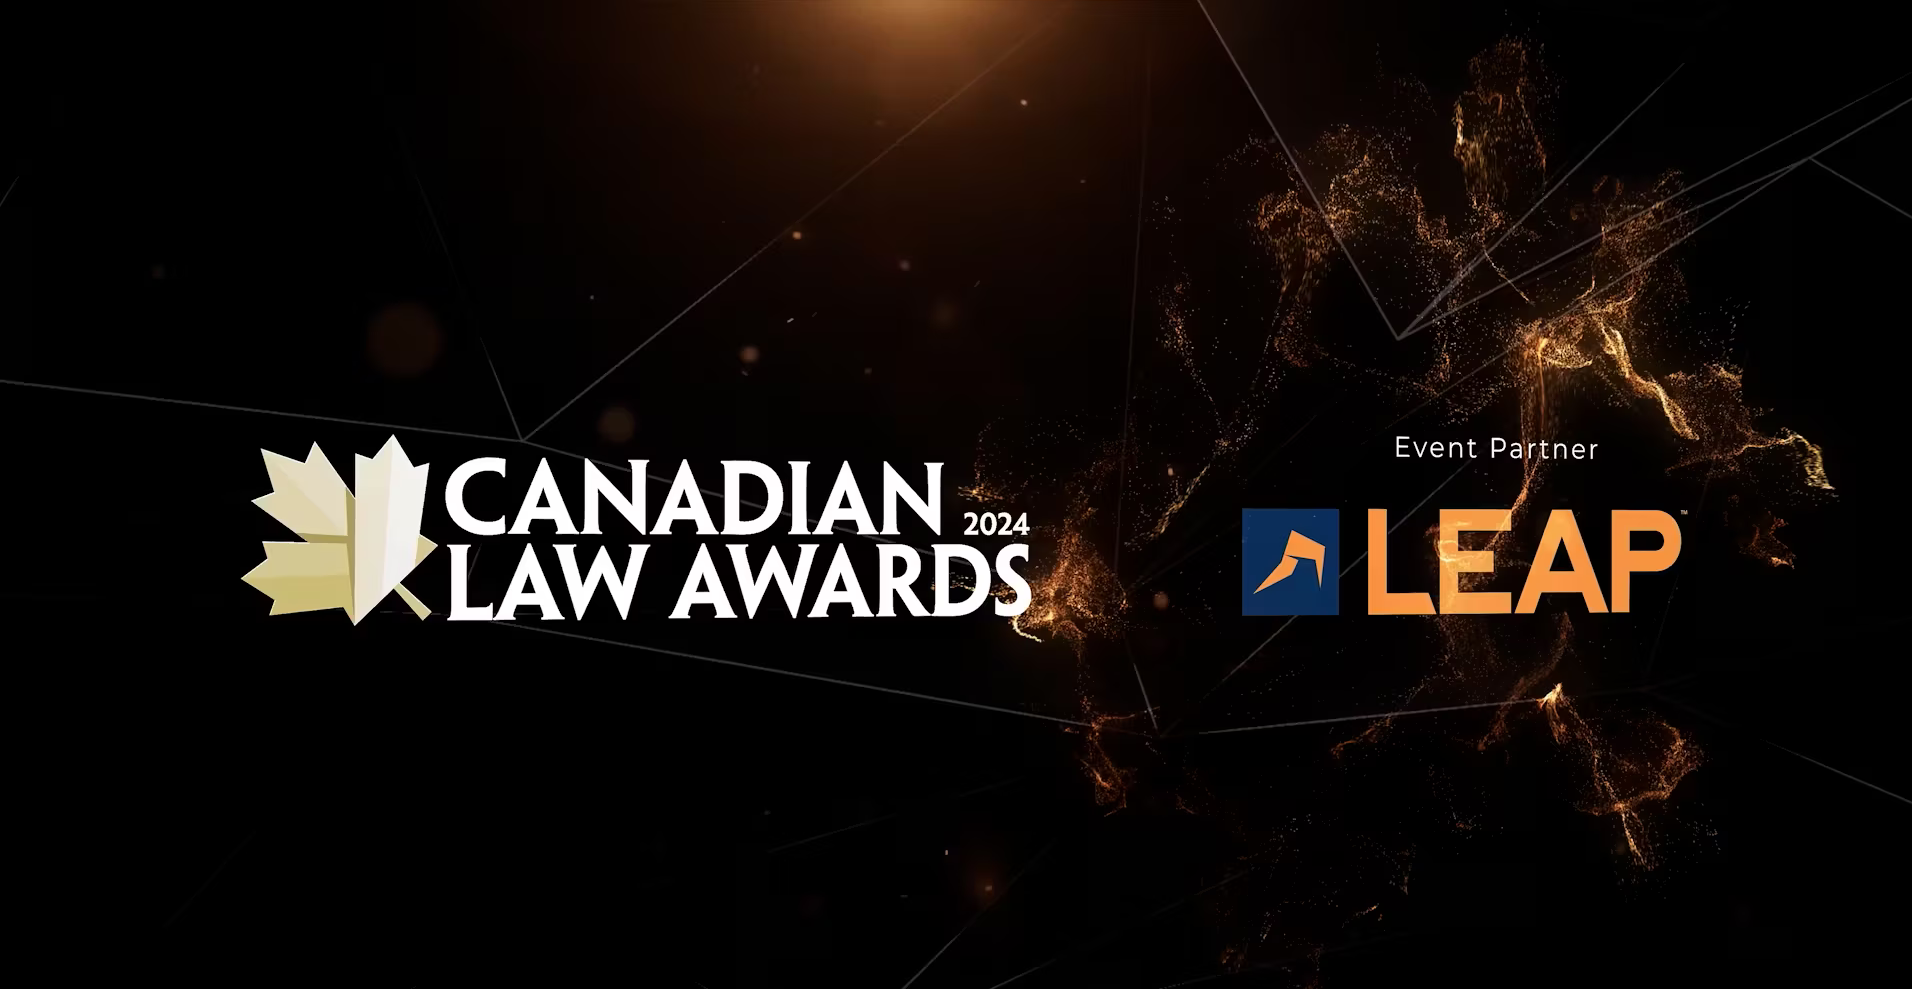 Calling all legal experts: Nominate the best Canadian legal professionals today